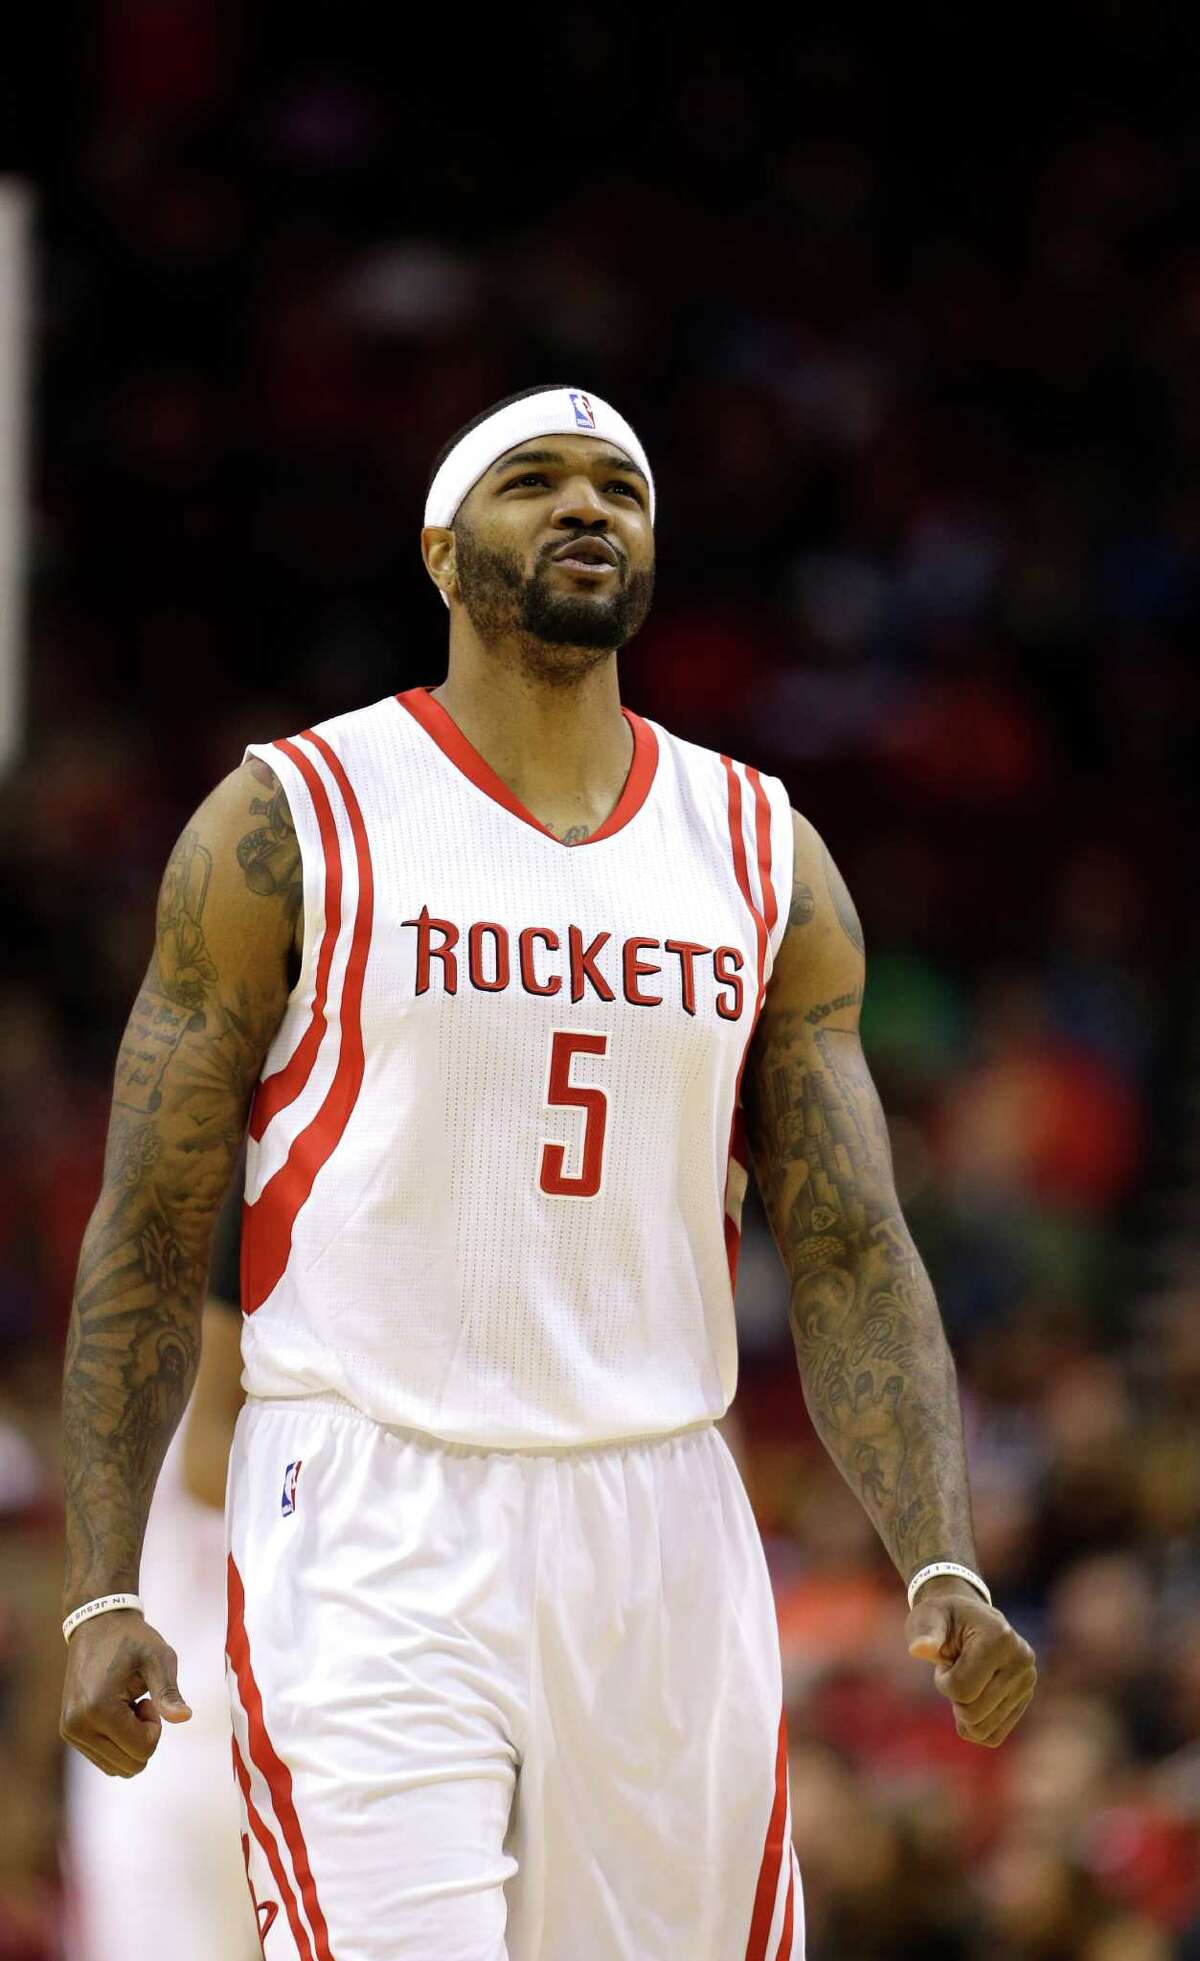 Houston Rockets' Josh Smith (5) walks down the court after missing a shot against the Milwaukee Bucks during the first half of an NBA basketball game Friday, Jan. 22, 2016, in Houston. (AP Photo/David J. Phillip)